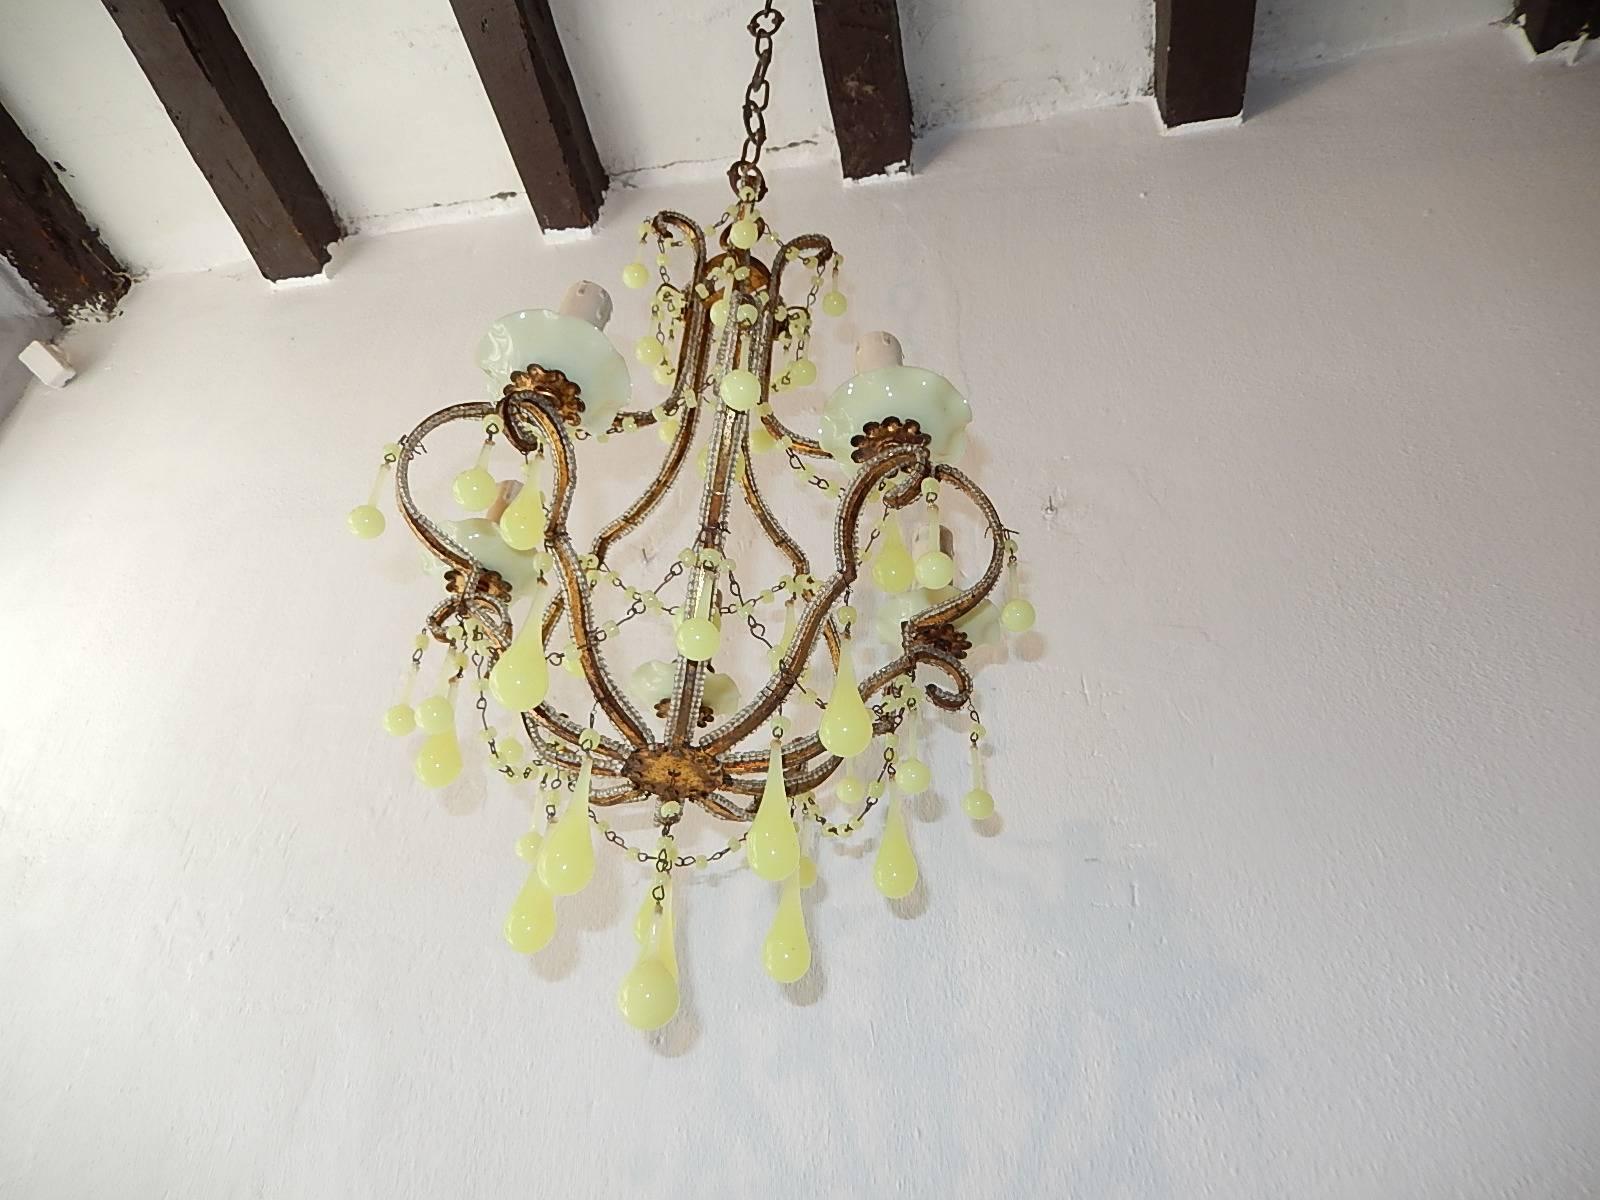 1920 French Beaded Yellow Opaline Bobeches, Beads and Drops Chandelier 1